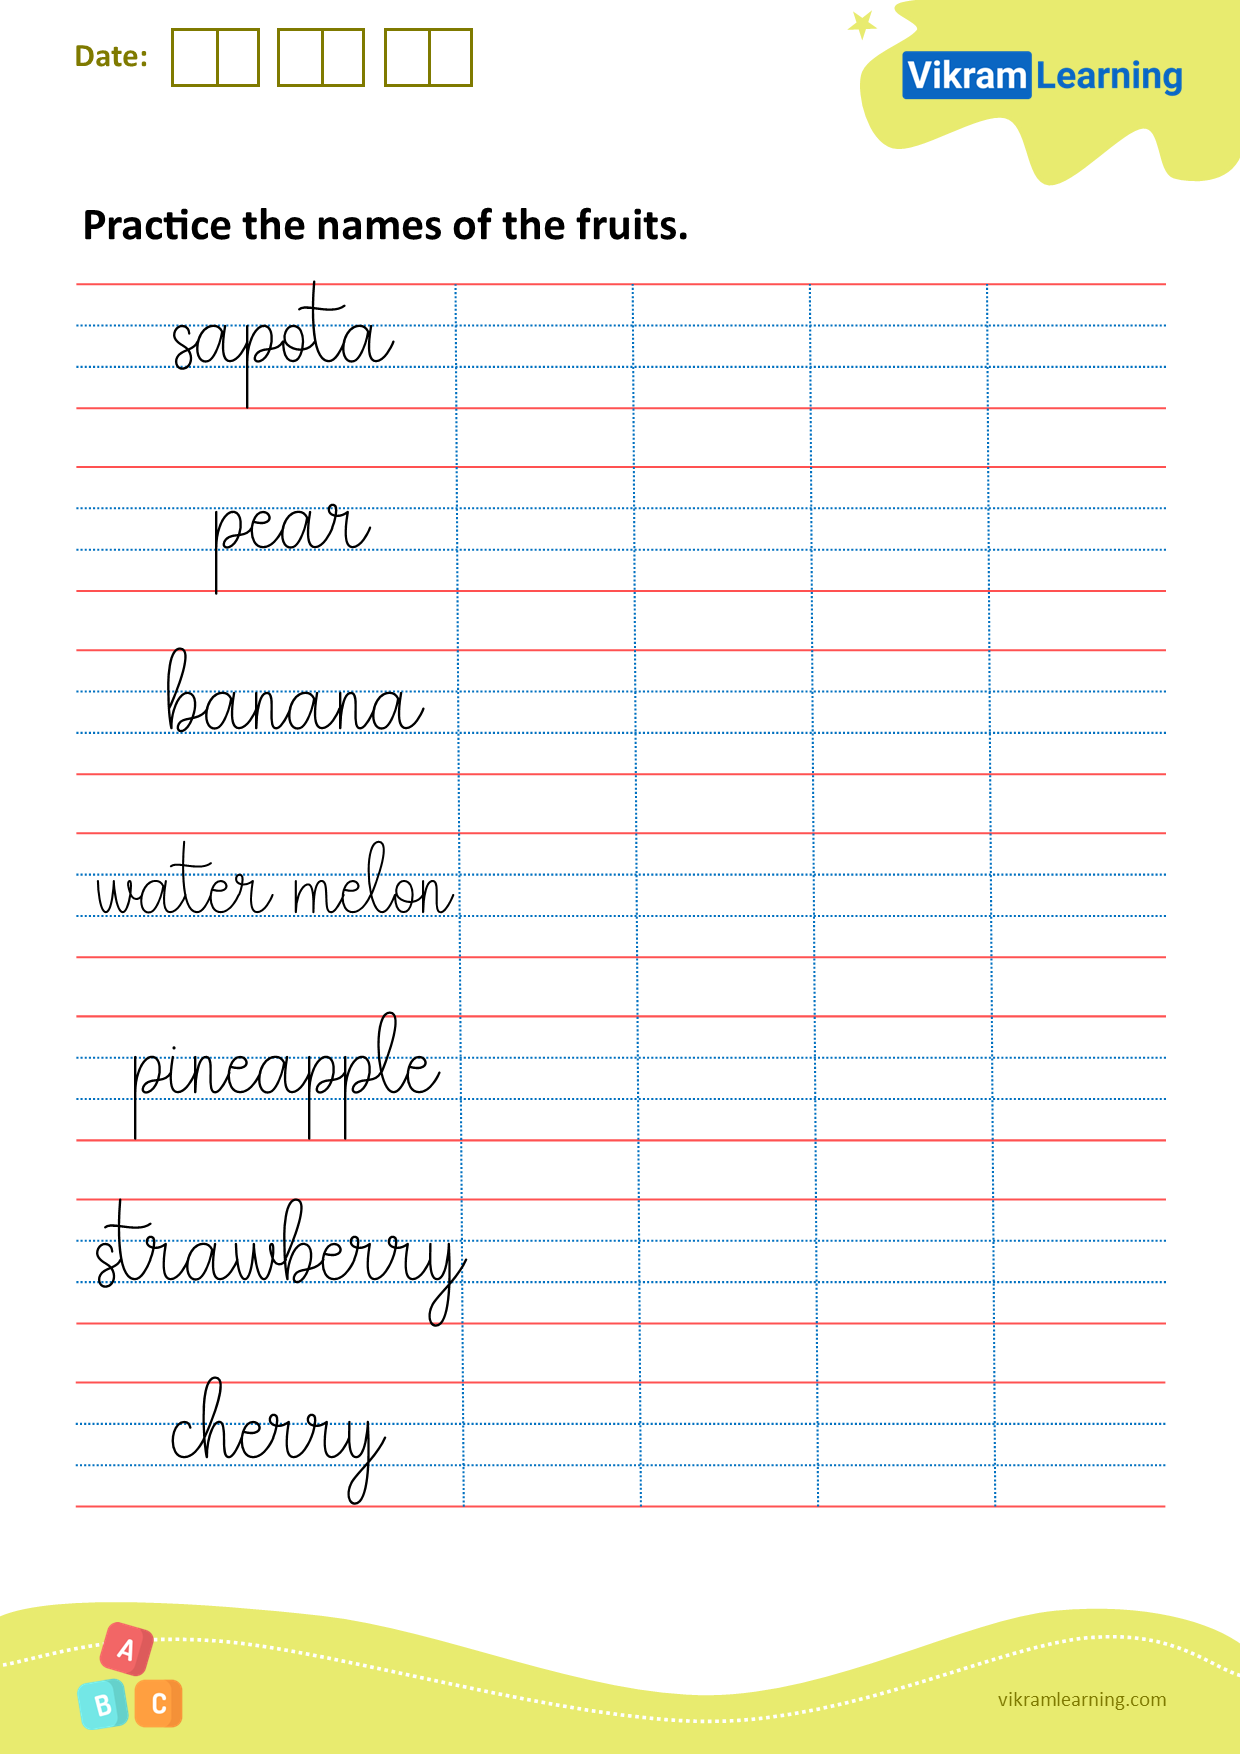 Download practice the names of the fruits worksheets